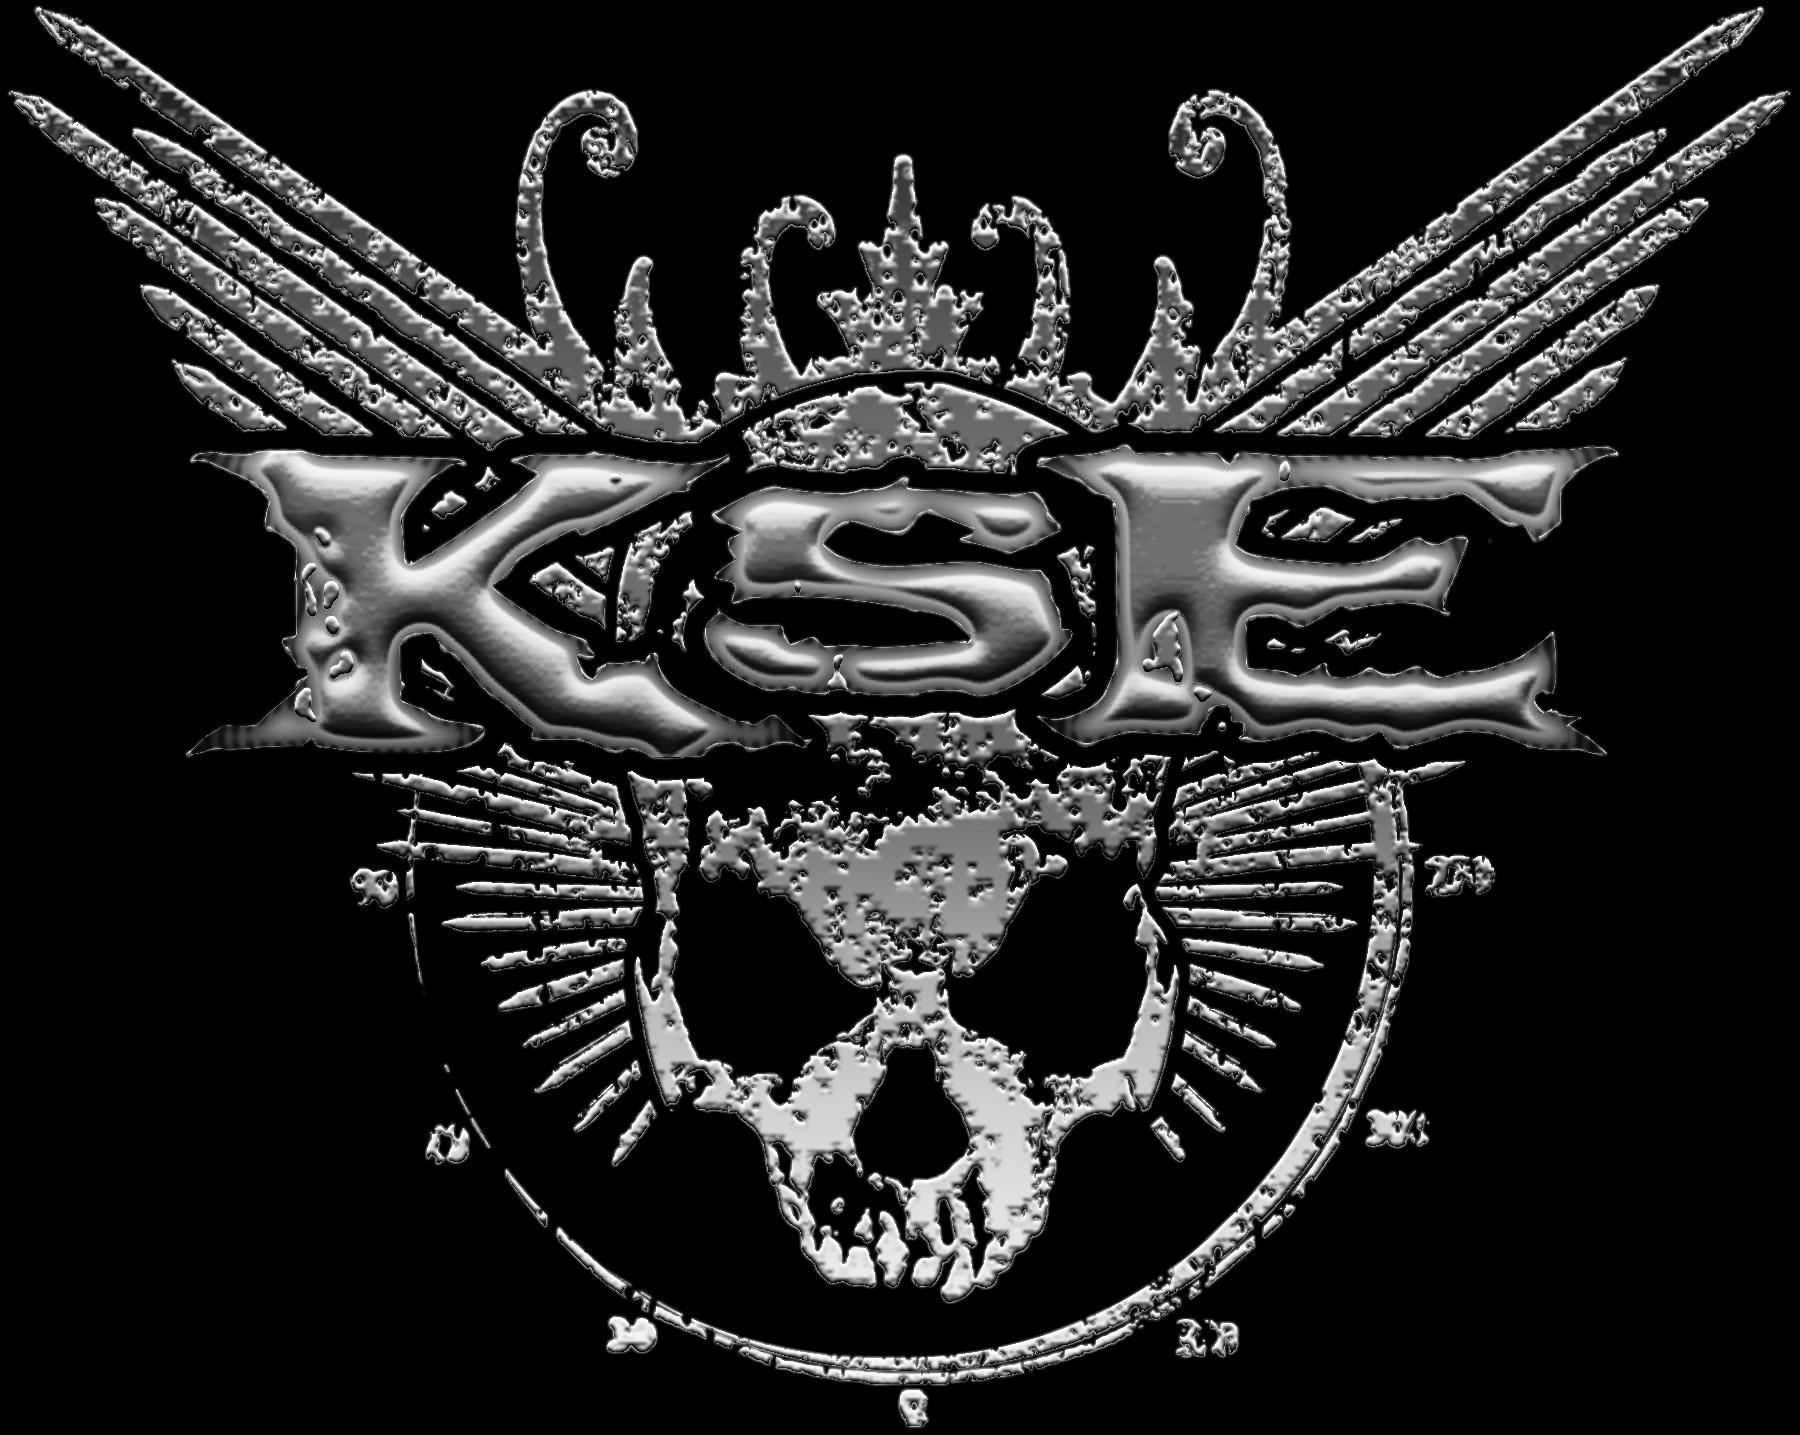 Rjm8762 Killswitch Engage iPhone Wallpaper Px Picserio